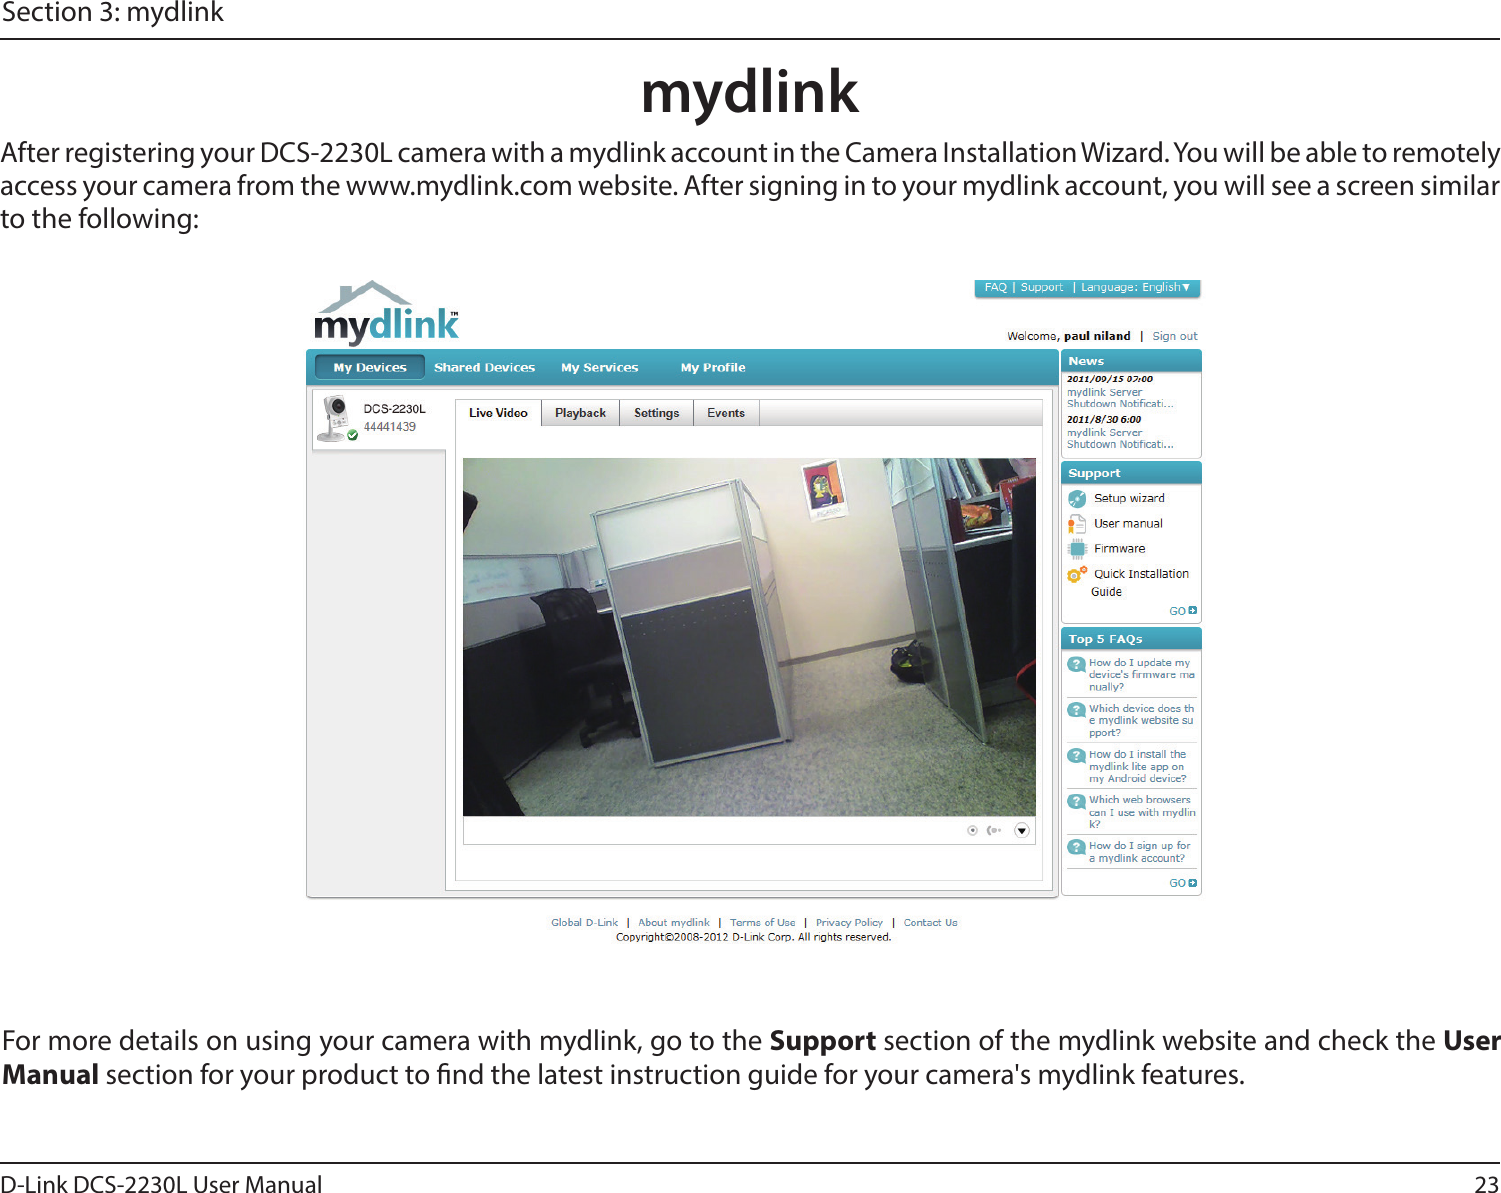 23D-Link DCS-2230L User ManualSection 3: mydlinkmydlinkAfter registering your DCS-2230L camera with a mydlink account in the Camera Installation Wizard. You will be able to remotely access your camera from the www.mydlink.com website. After signing in to your mydlink account, you will see a screen similar to the following:For more details on using your camera with mydlink, go to the Support section of the mydlink website and check the User Manual section for your product to nd the latest instruction guide for your camera&apos;s mydlink features.